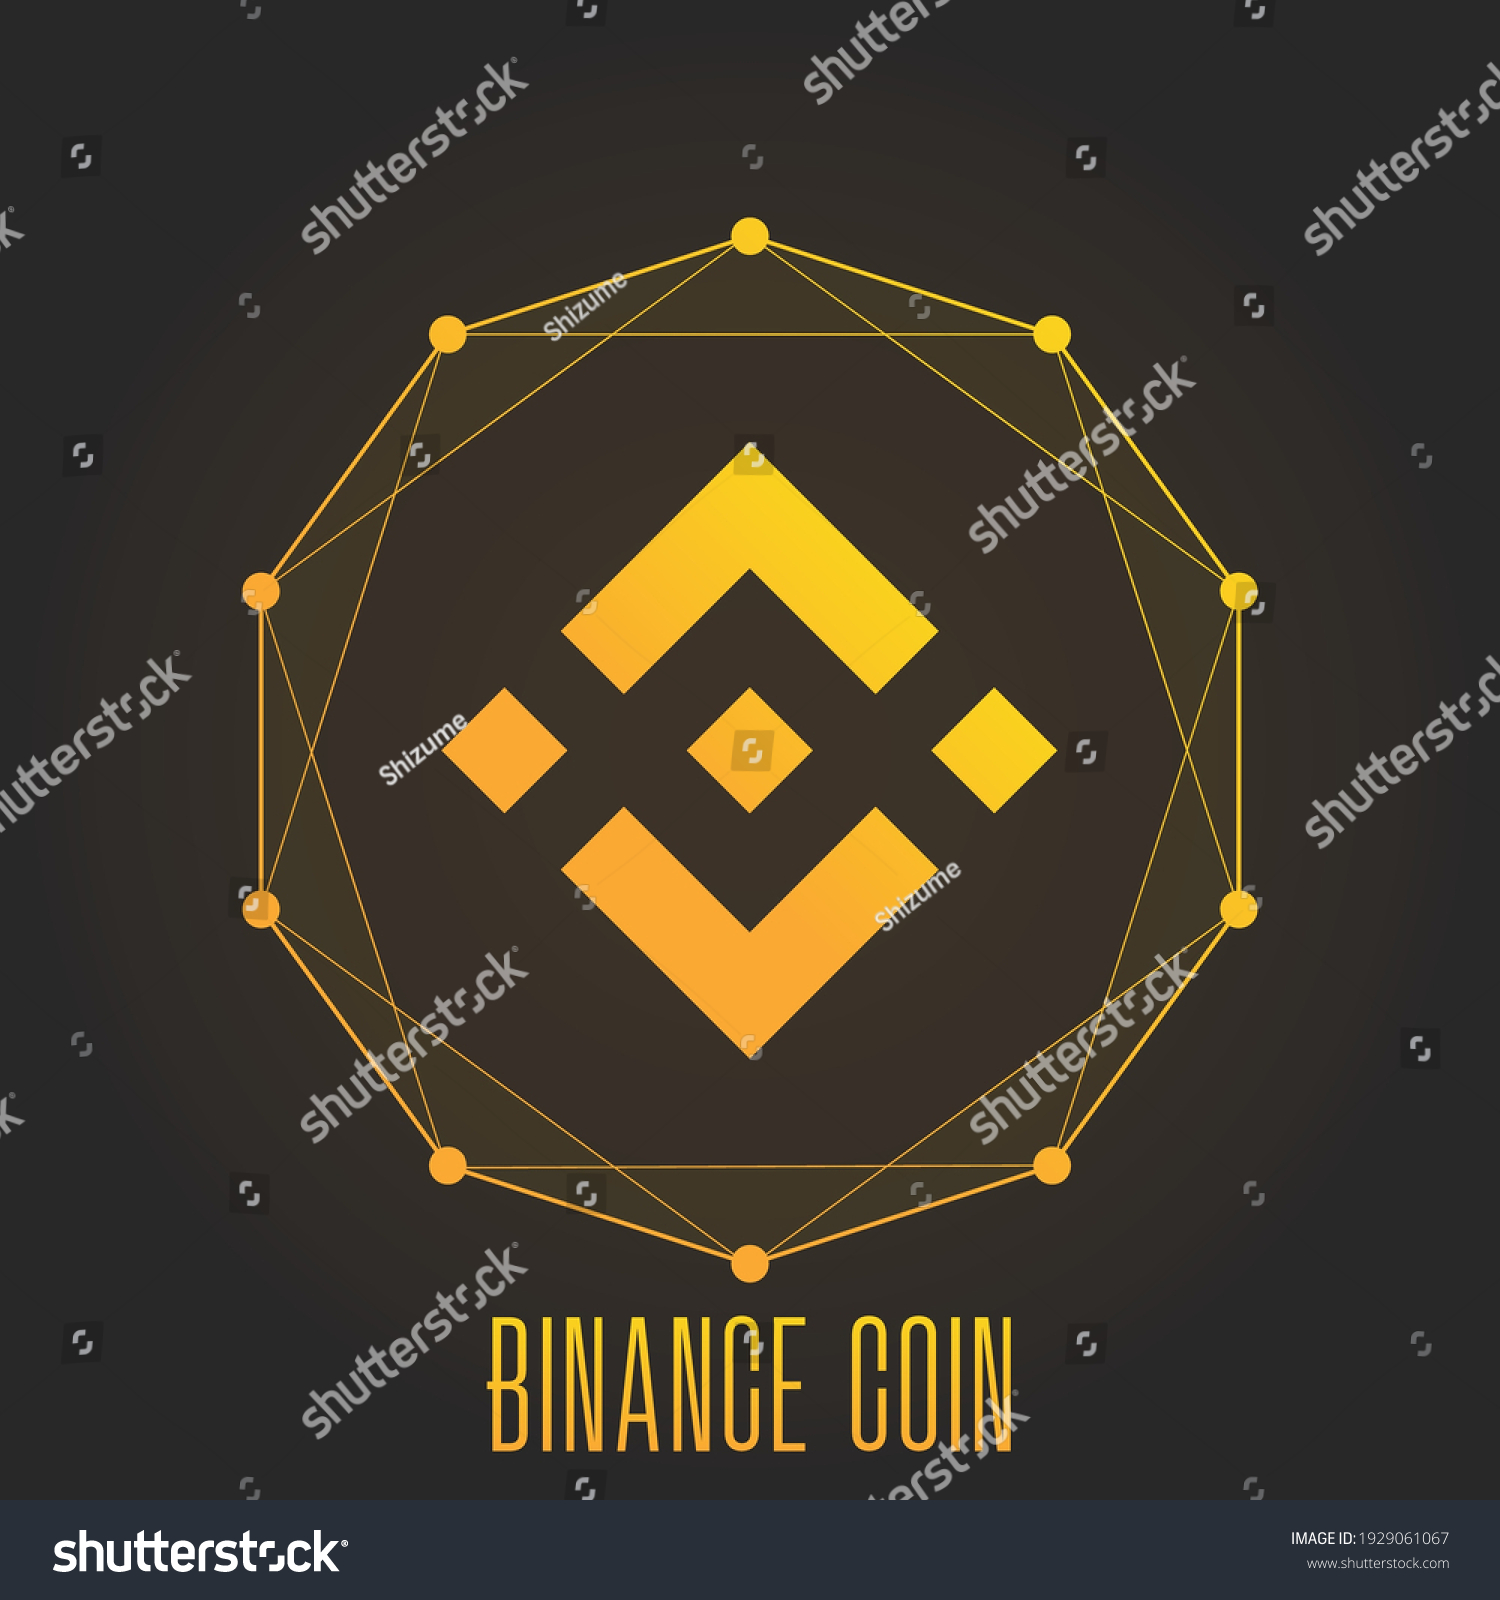 SVG of Binance coin icon. Colorful gradient logo isolated on dark background. svg